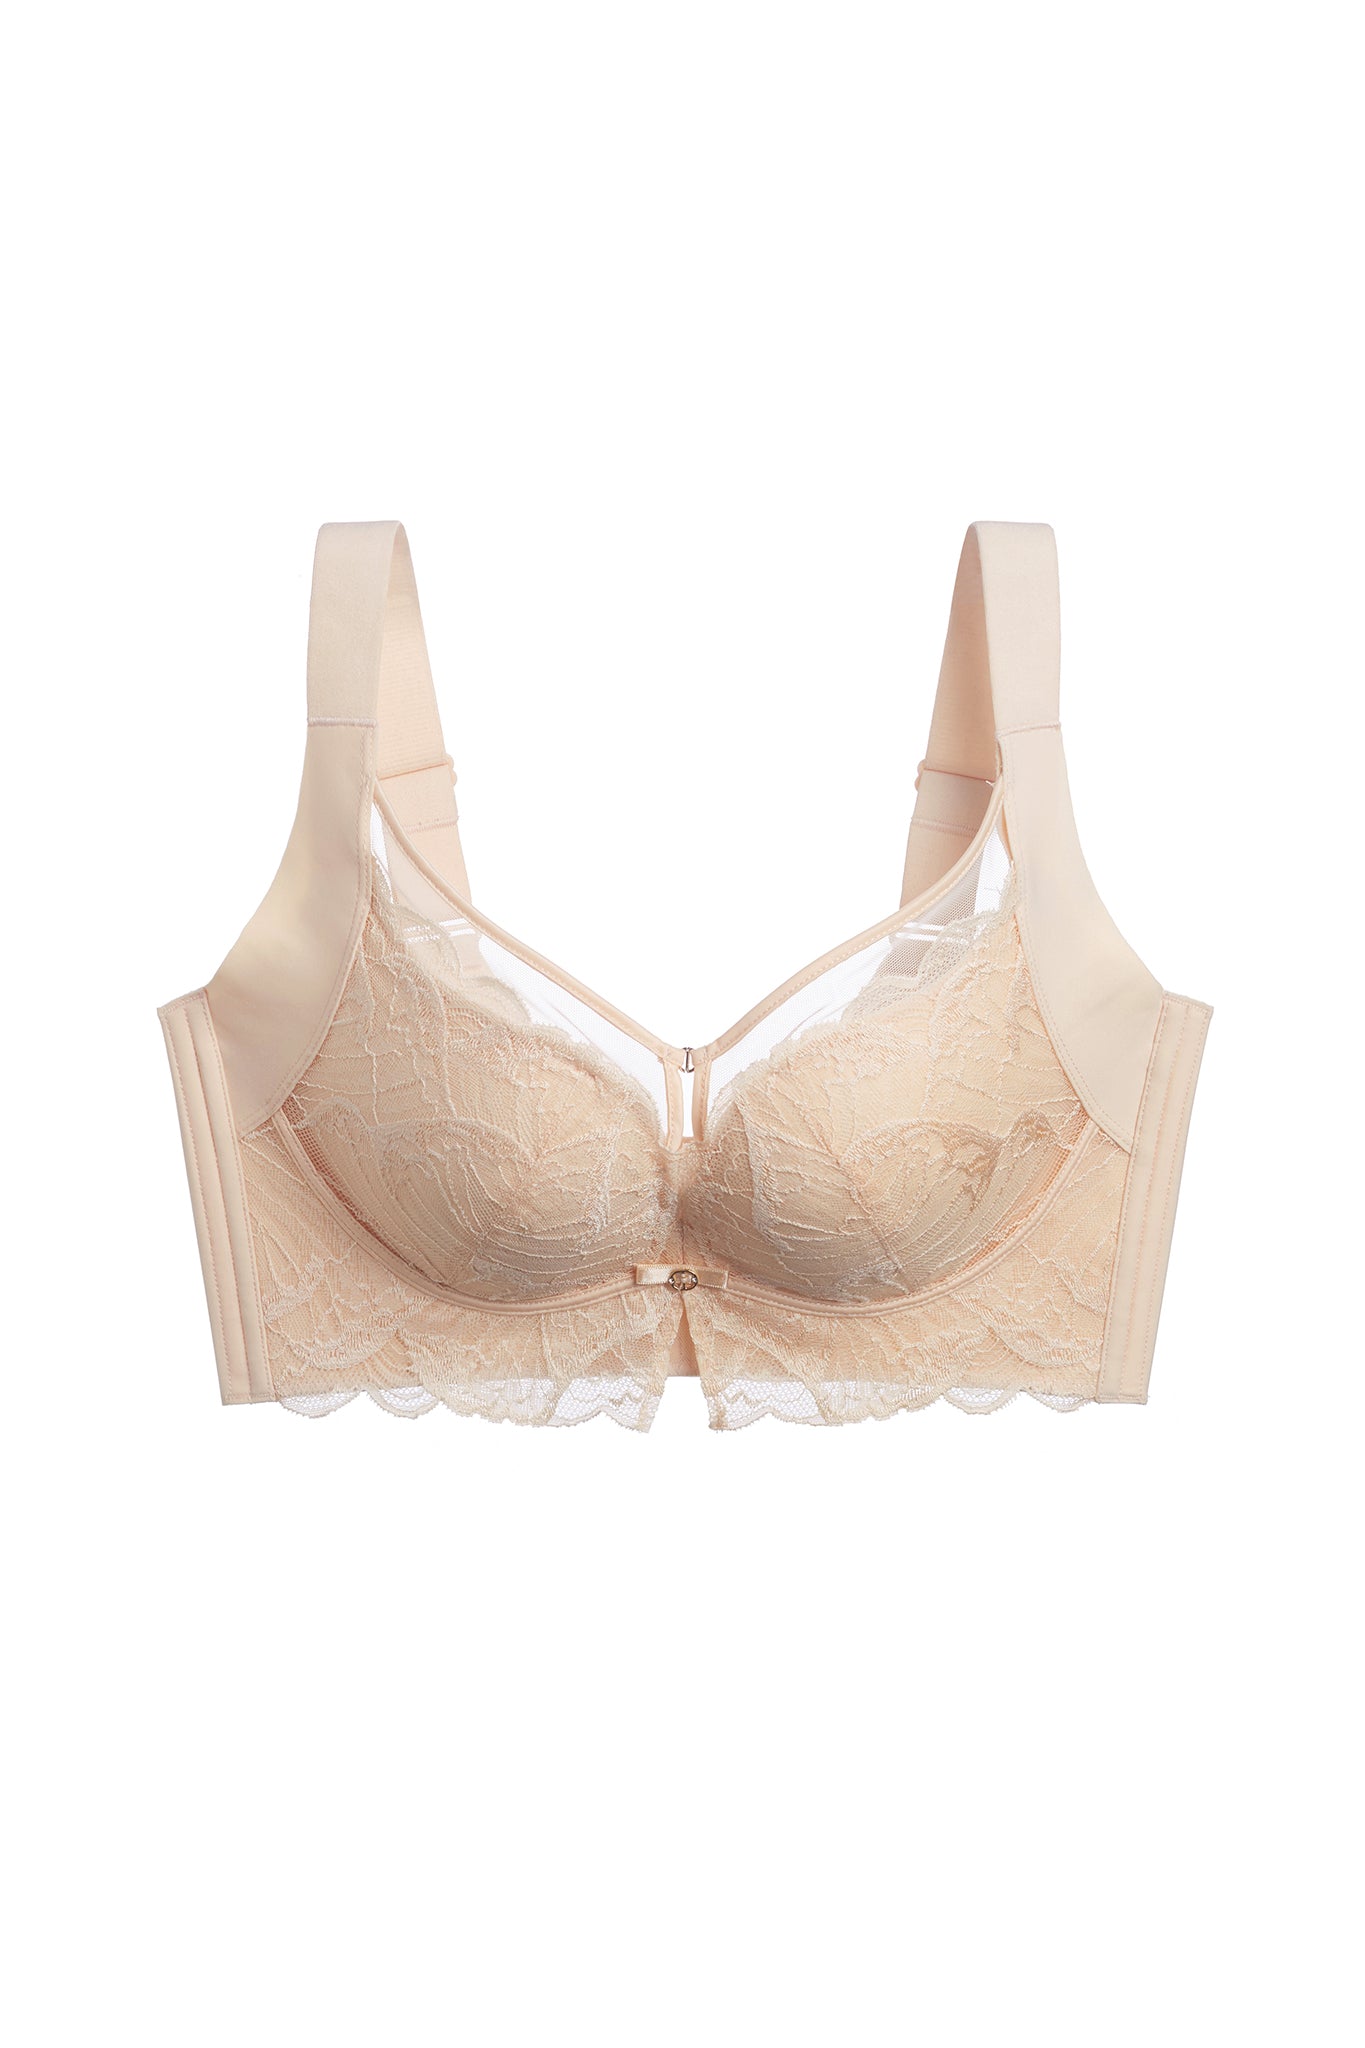 Easy Pieces™️ Floral Lace Unlined Luxury Bra - POSESHE